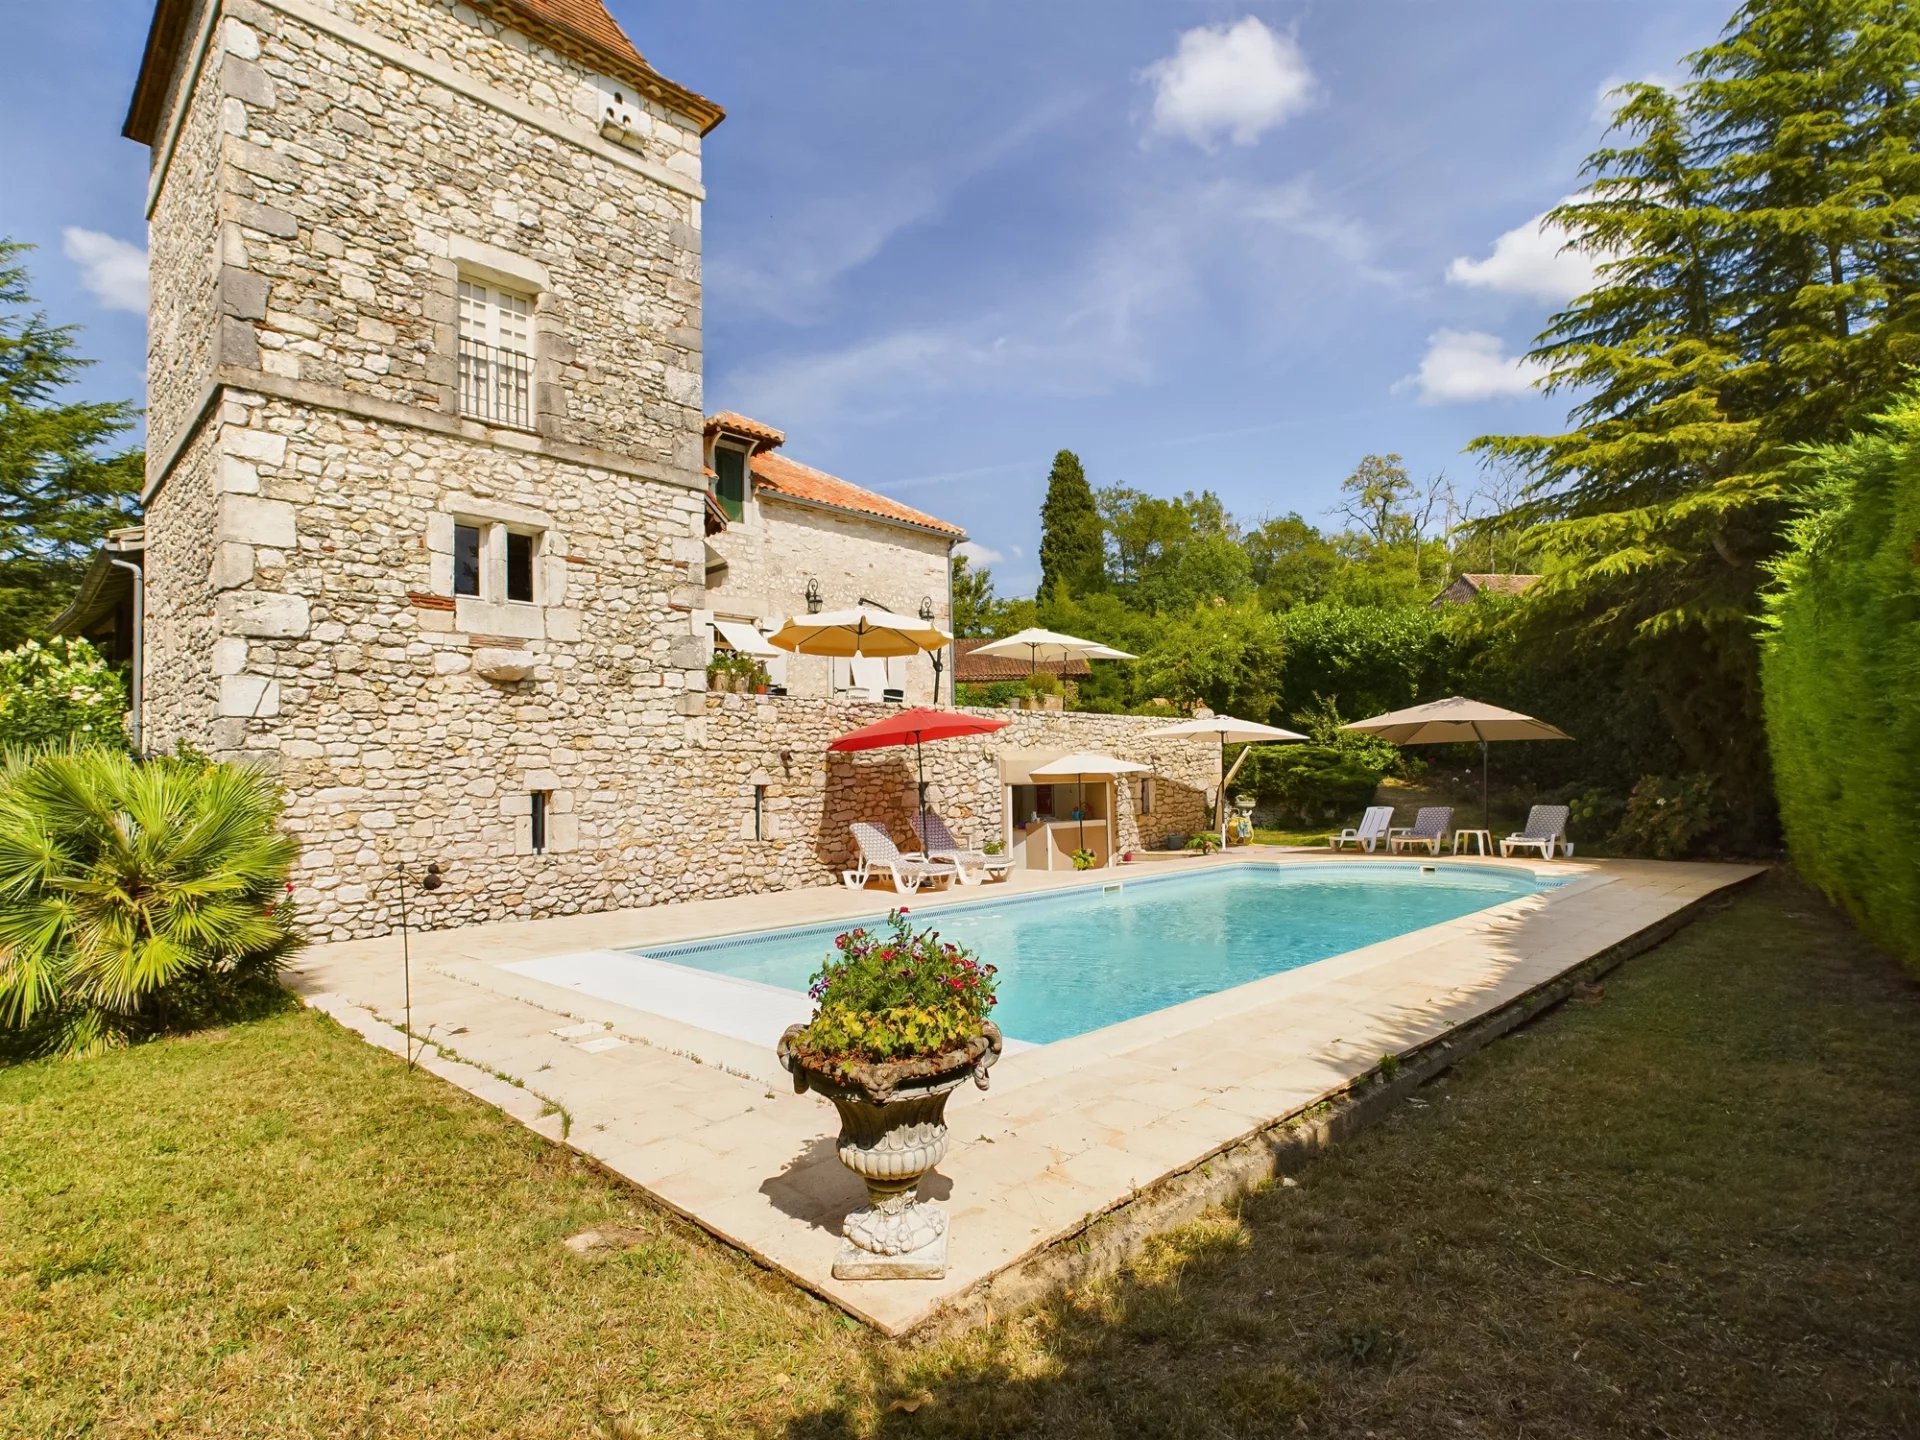 Superb stone property with swimming pool